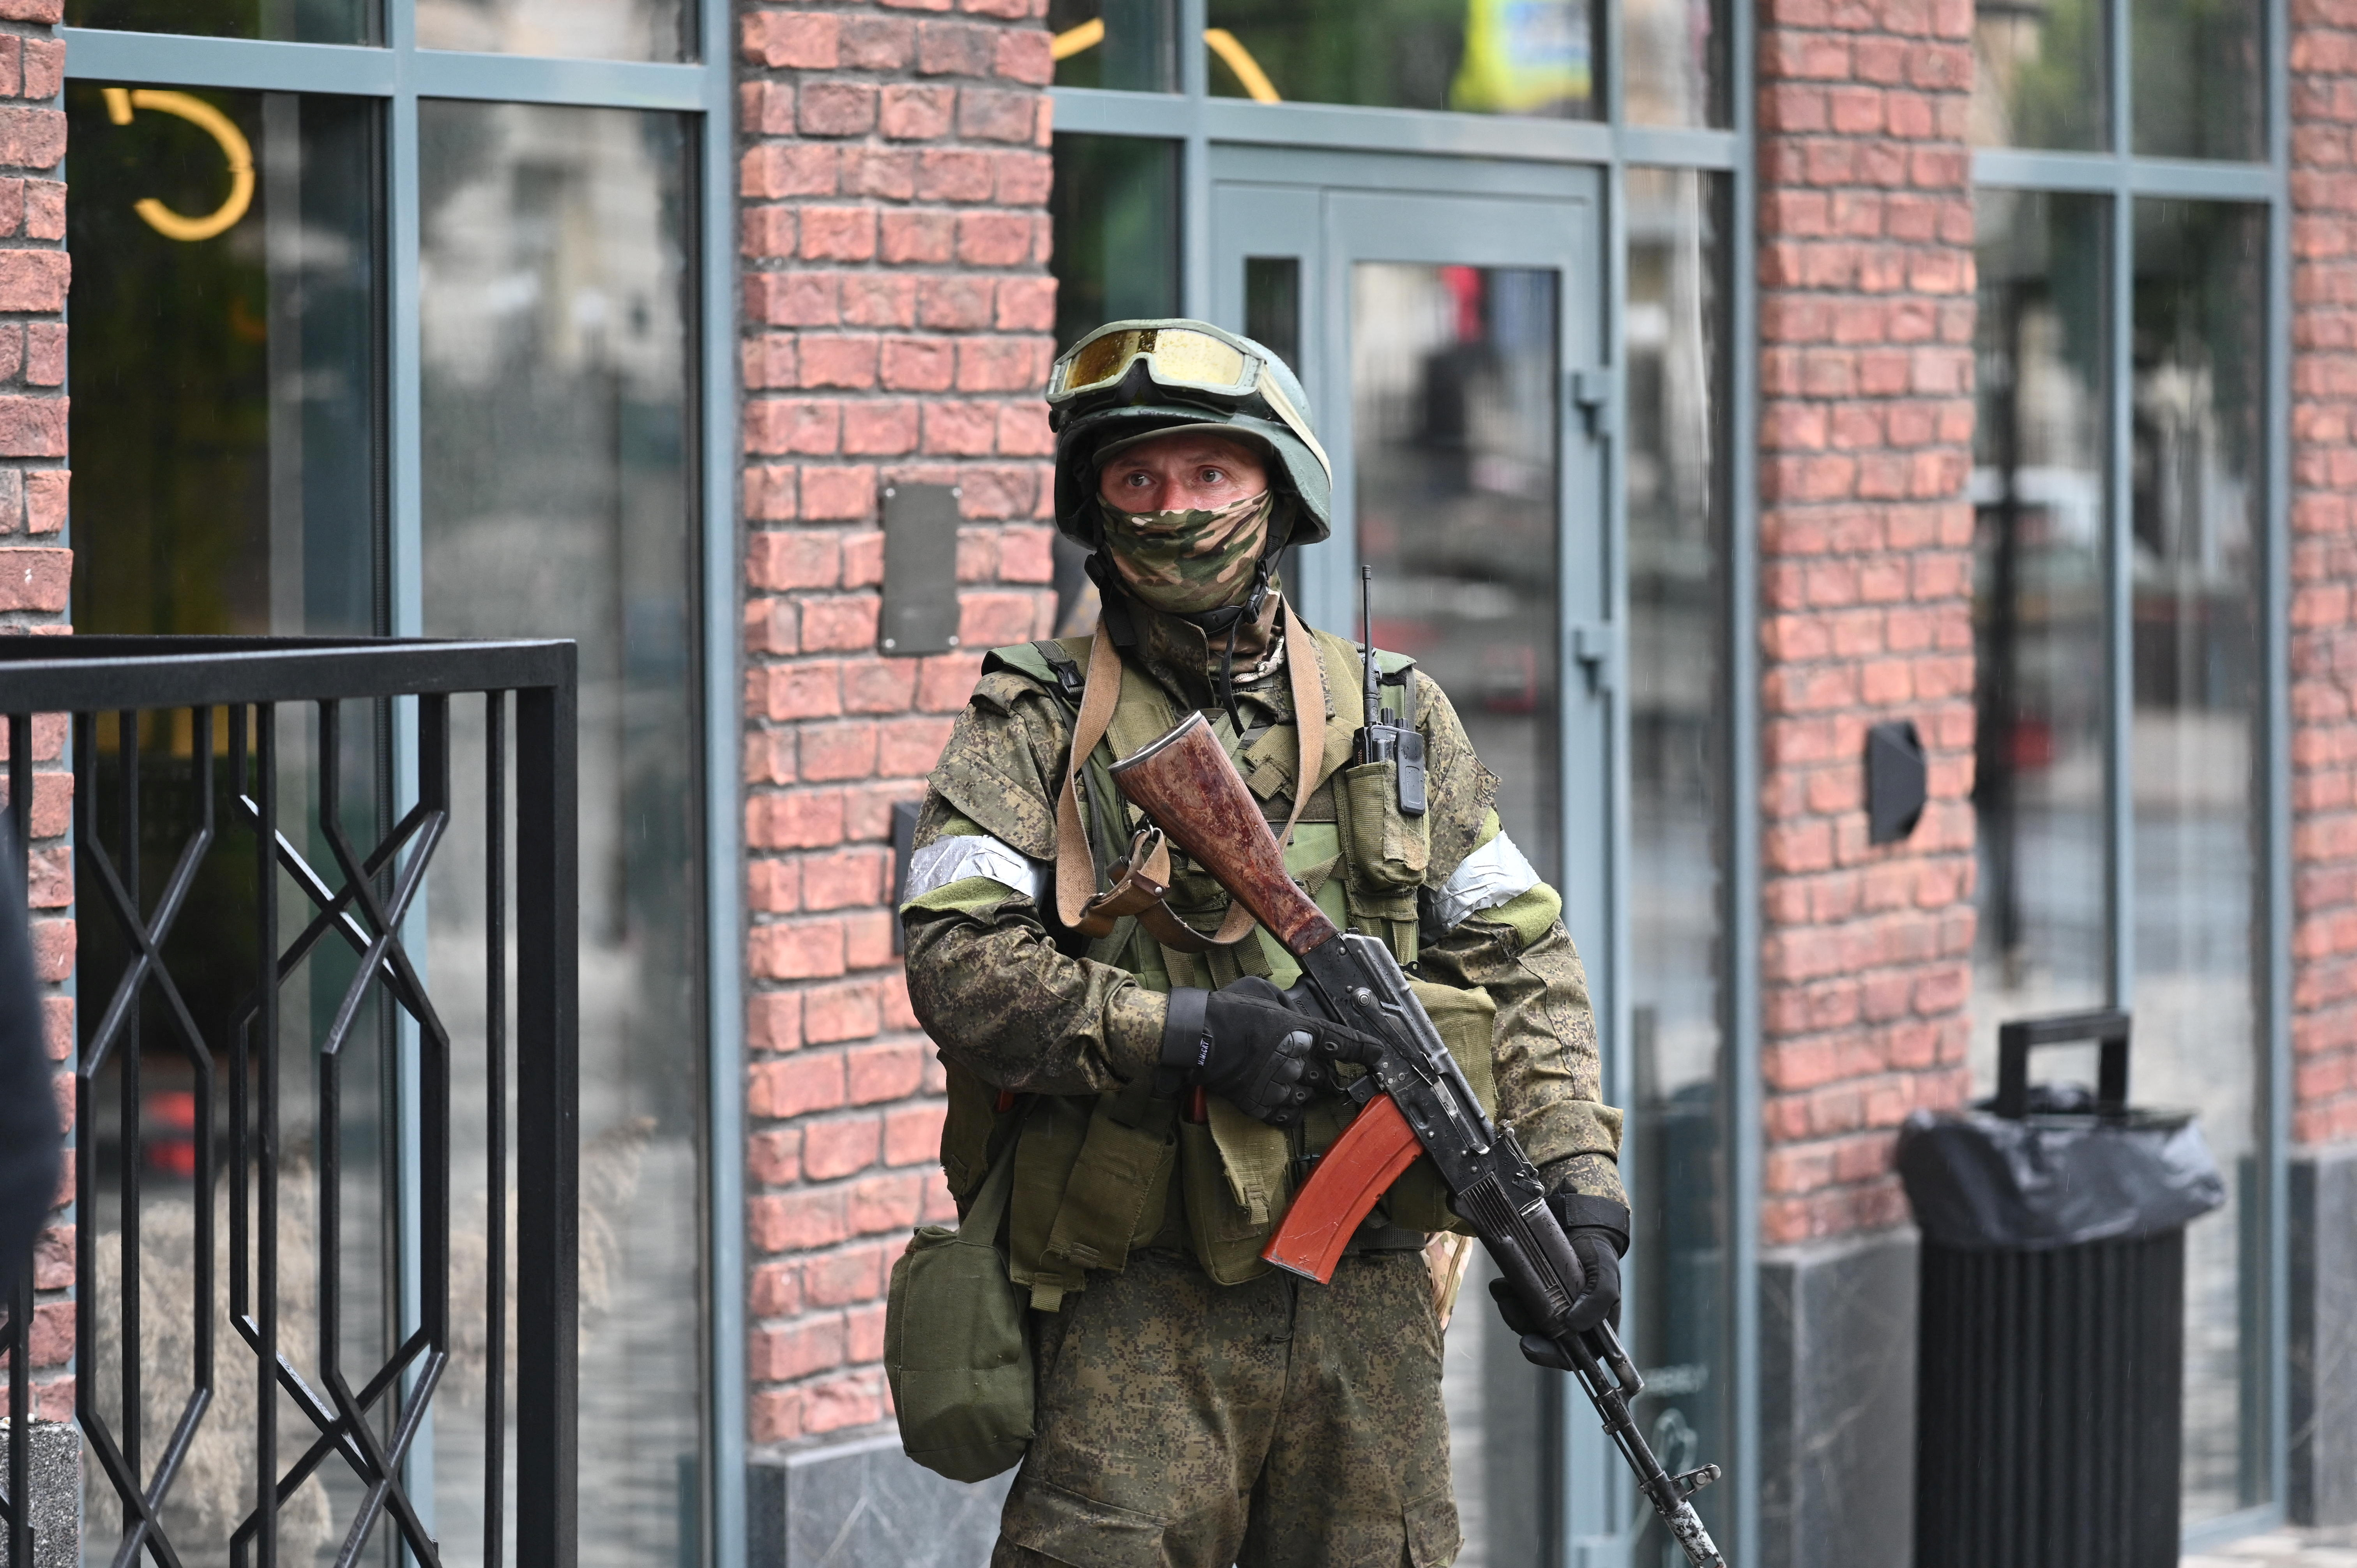 A fighter of Wagner private mercenary group stands guard in a street in Rostov, Russia, June 24, 